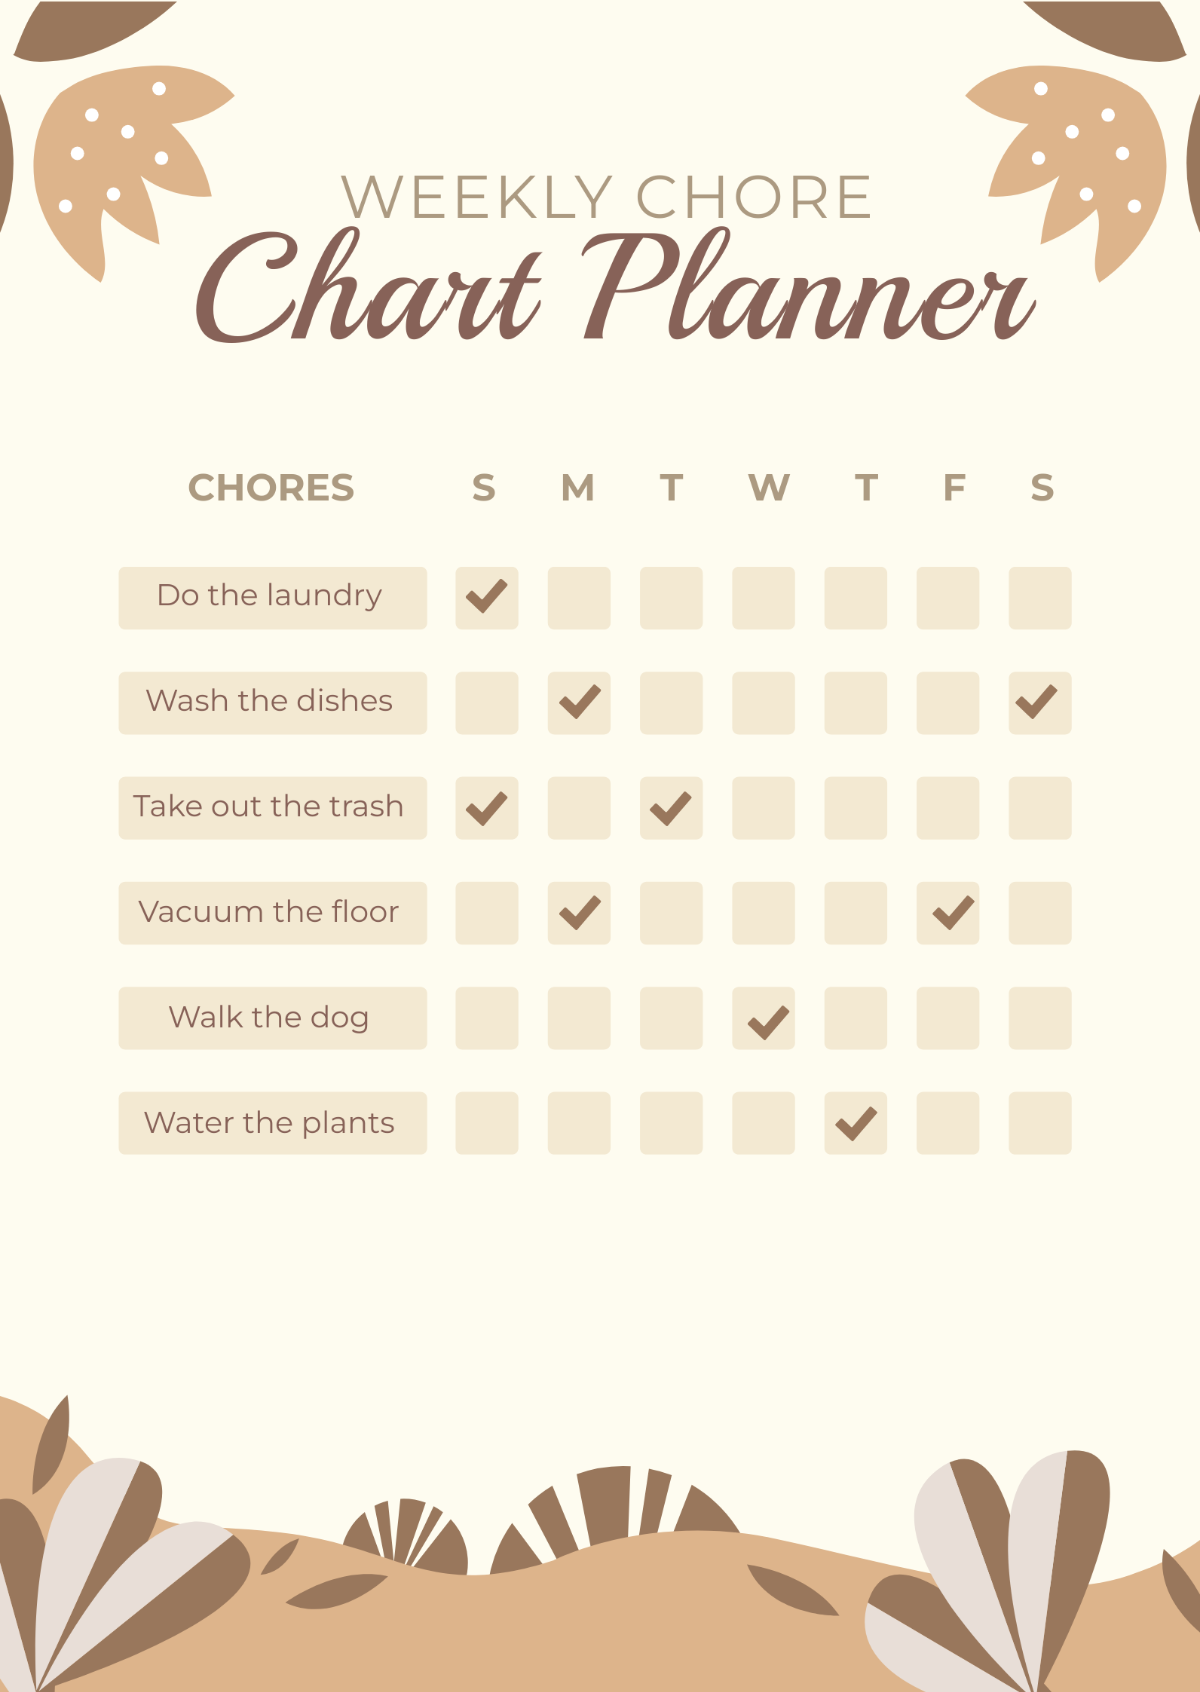 Weekly Chore Chart Planner Template